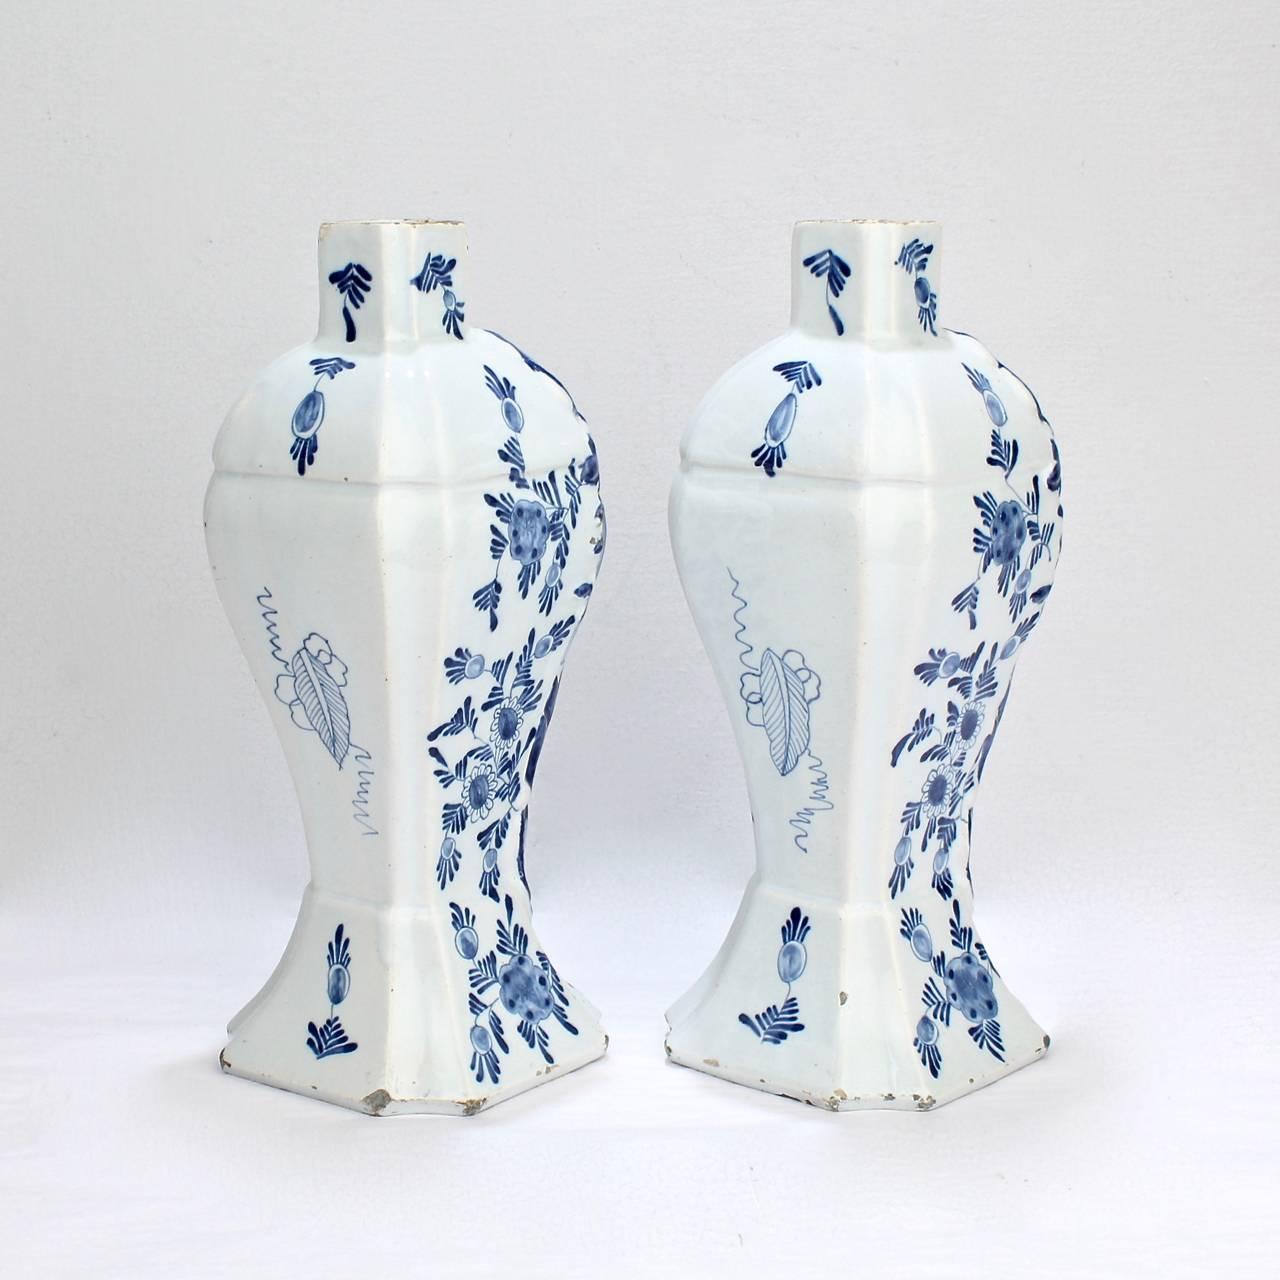 Rococo Pair of Antique Blue and White Dutch Delft Mantel Garniture Vases or Jars